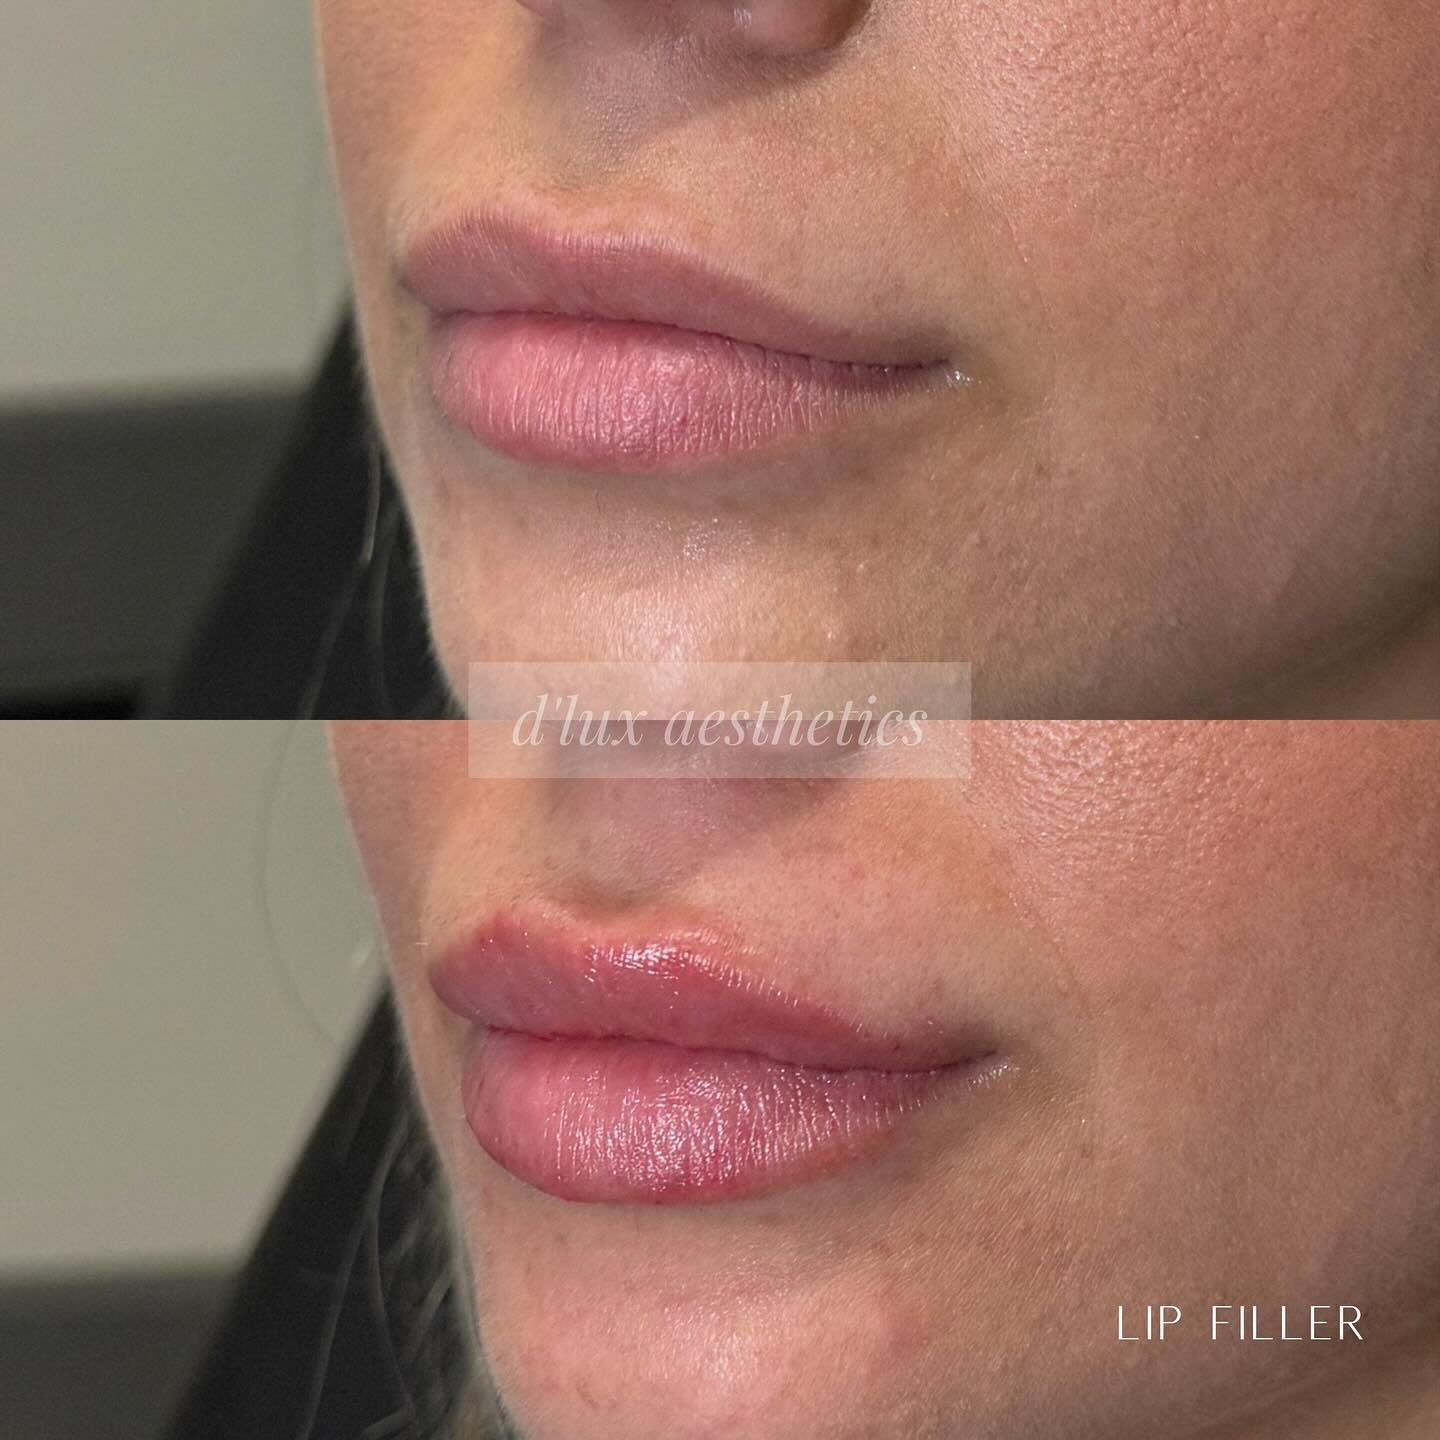 Say yes to a new pout 💋 | @juvederm 

For this patient we used .5ML of JUV&Eacute;DERM ULTRA PLUS to achieve a little extra plump and correction of asymmetry.

-Intended for US Audiences only
-Results may vary
-For important safety information see @